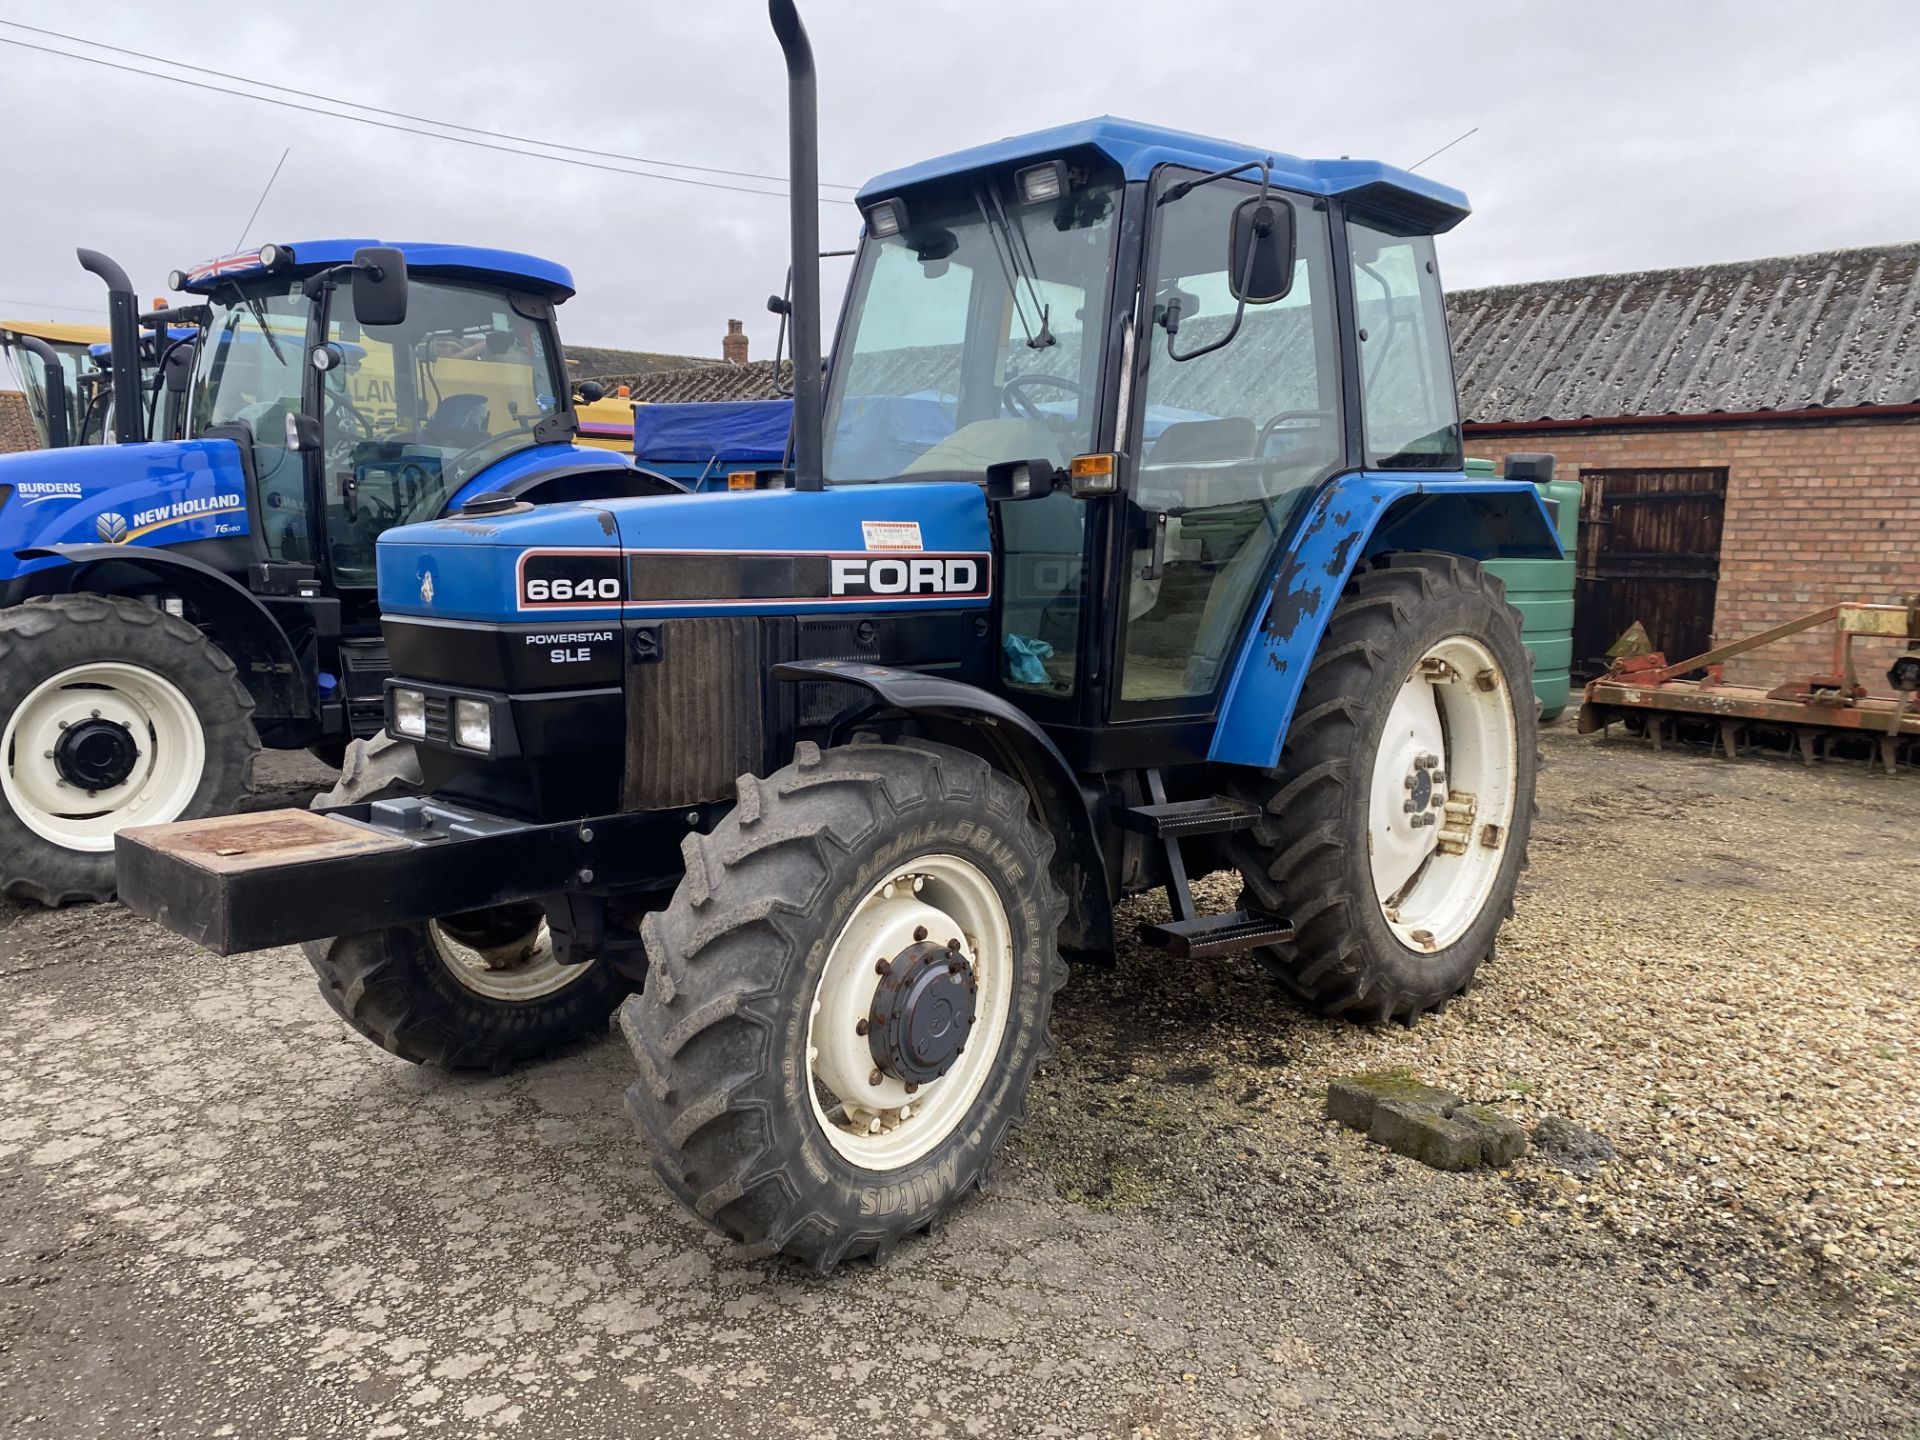 (96) Ford 6640 SLE (Powerstar), 4wd Tractor, Air Con with 6,500 hrs Reg N740 PEE, Rear tyres 13.6